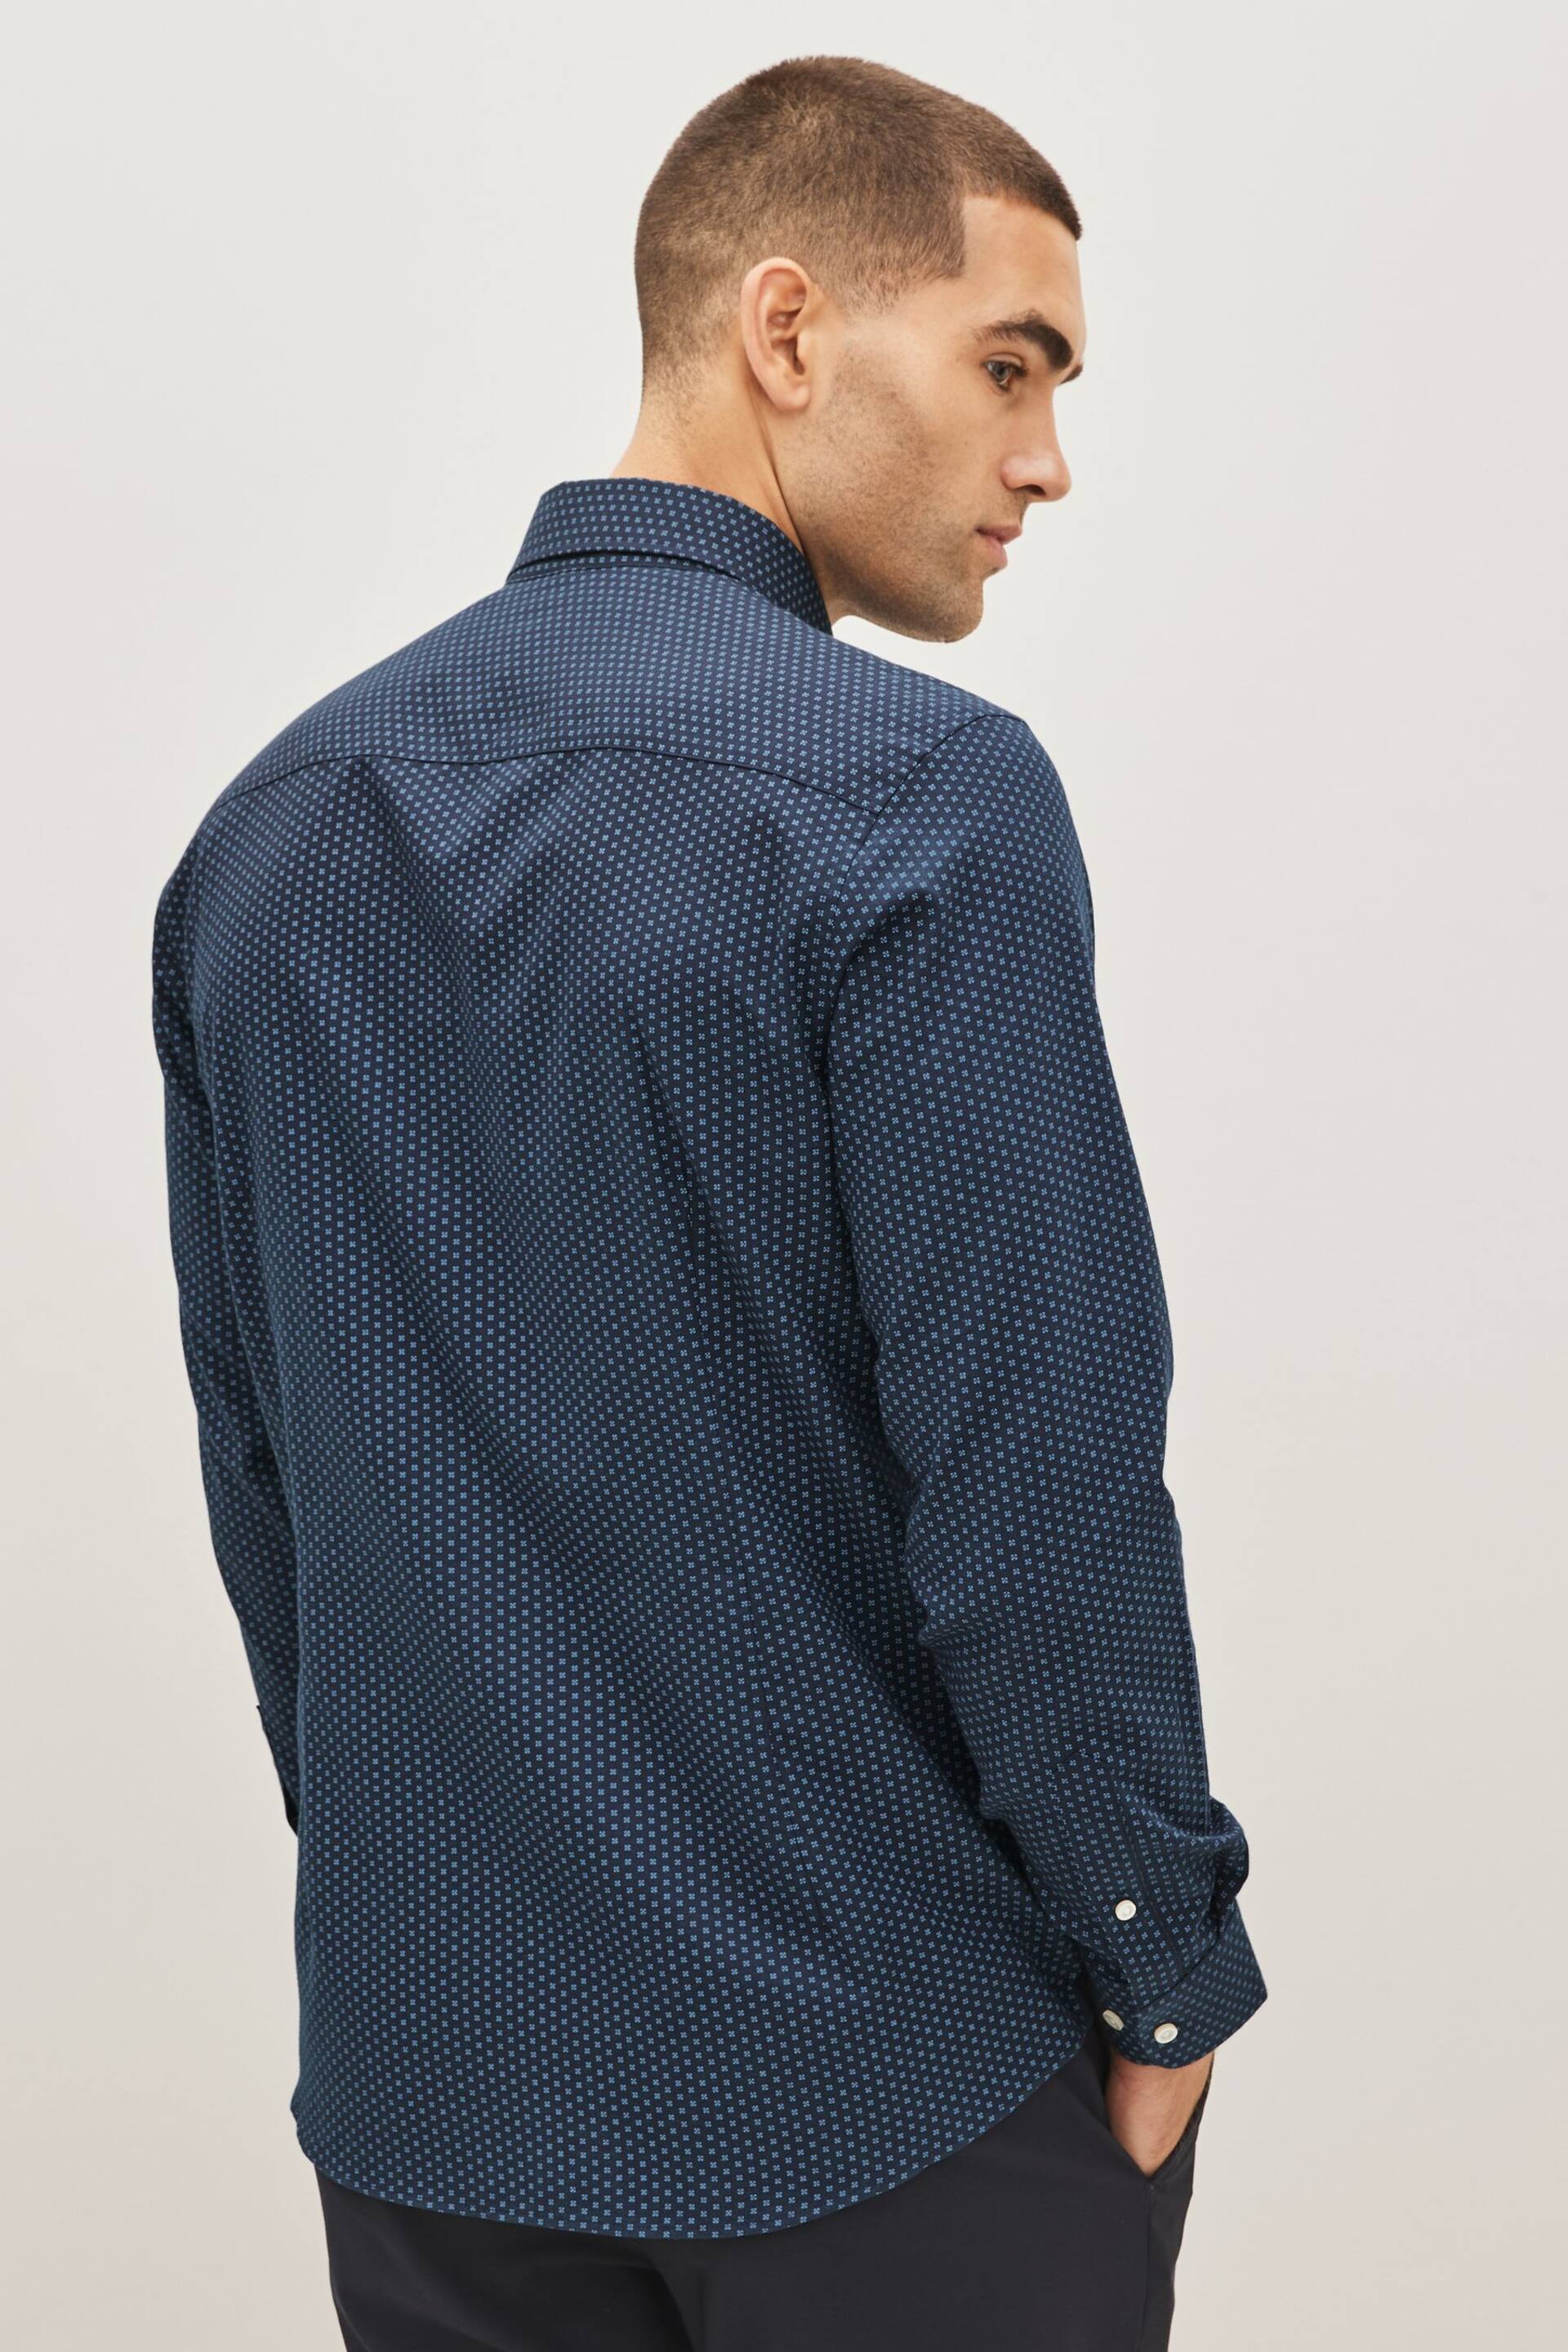 Navy Blue Slim Fit Easy Iron Button Down Oxford Shirt - Image 3 of 7